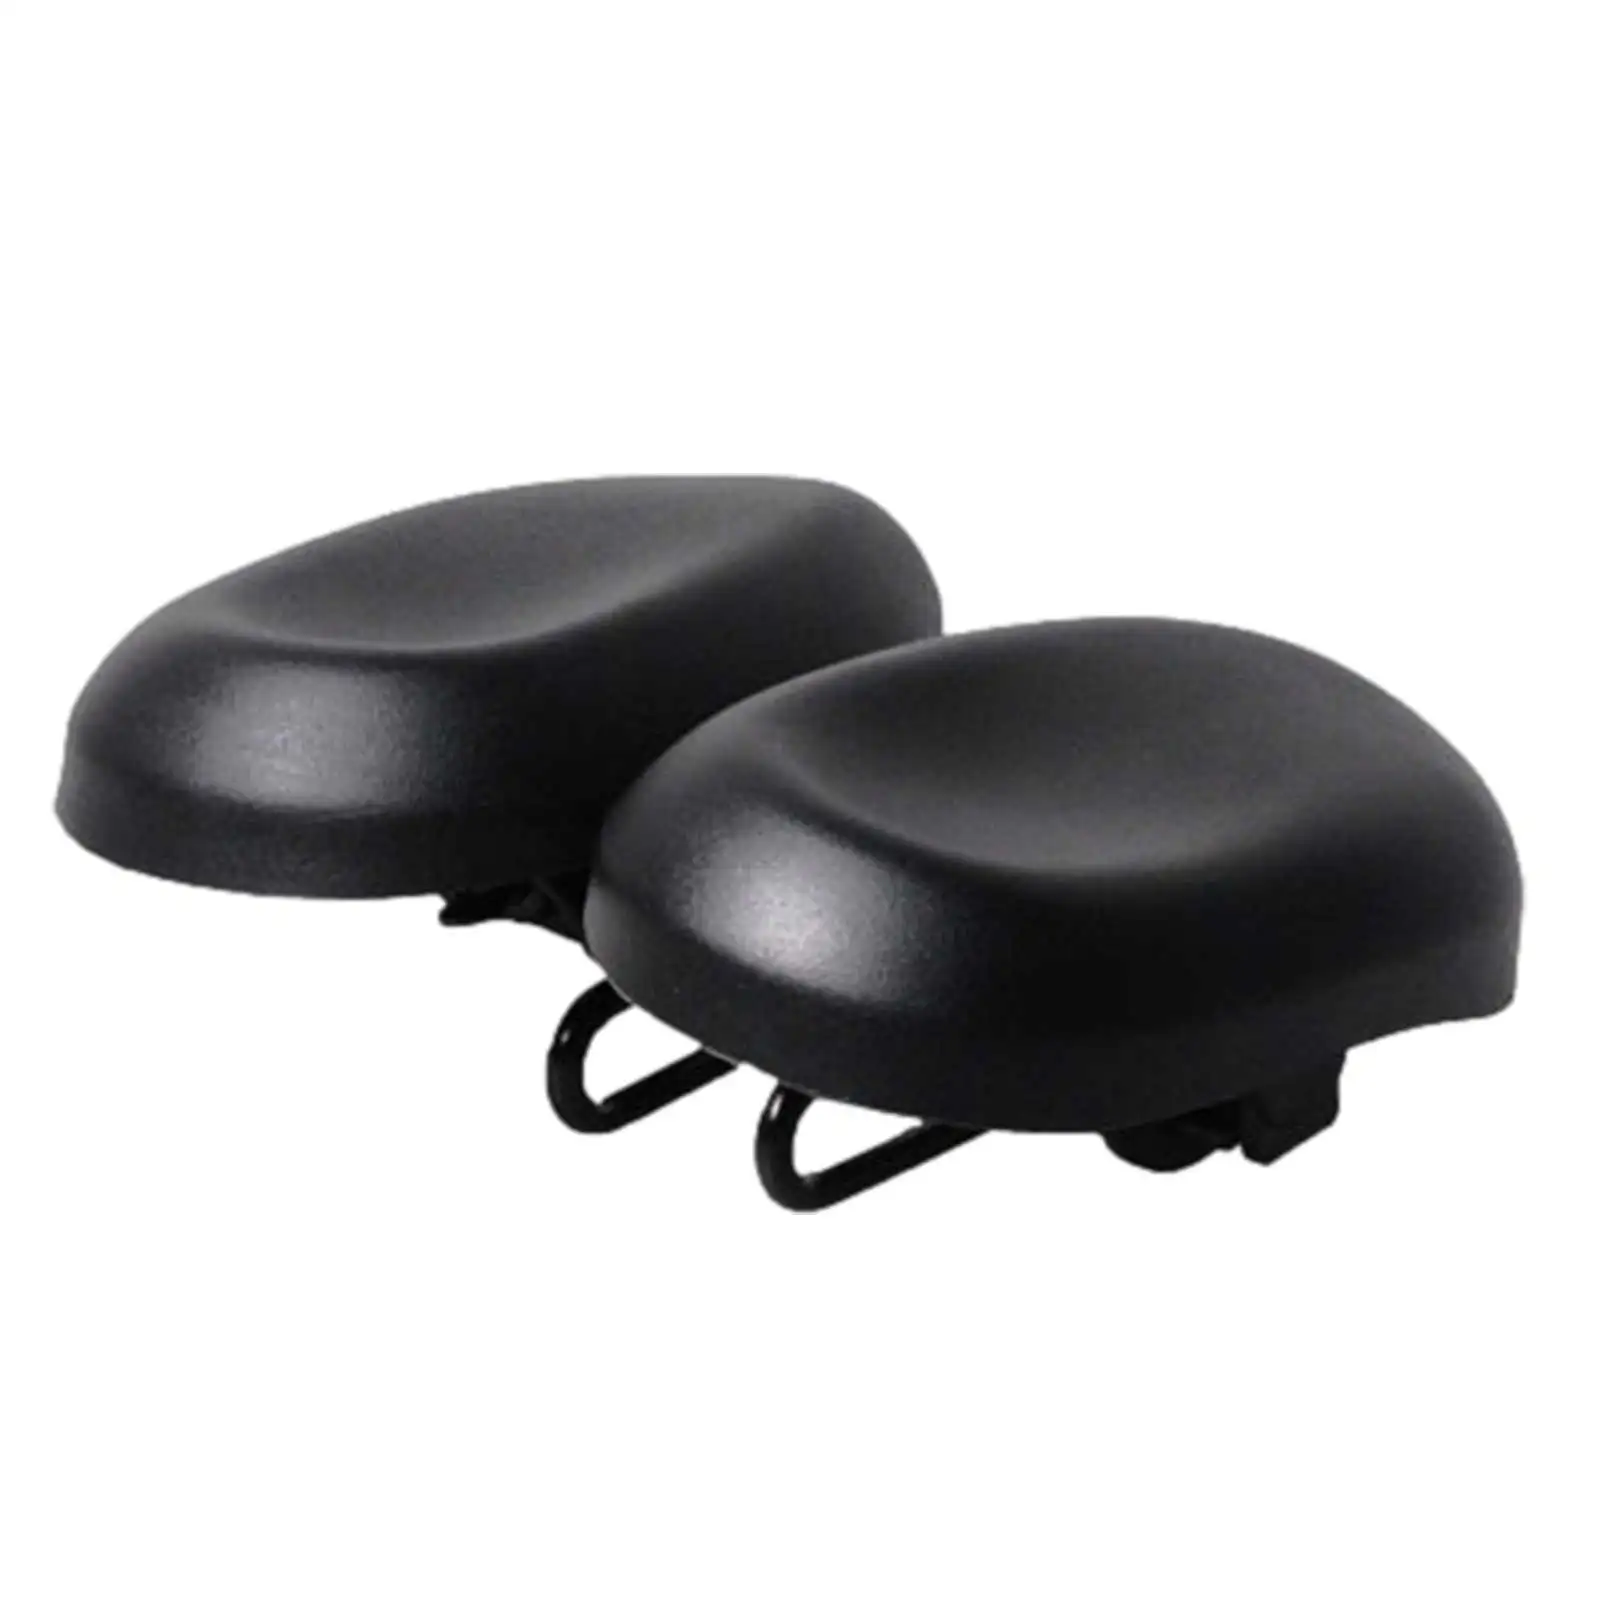 

Thickened Widened Bicycle Seat Cushions Soft Seat Cushions Widen Bike Saddle For Extra-Large Bikes Big Butt Cycling Accessory